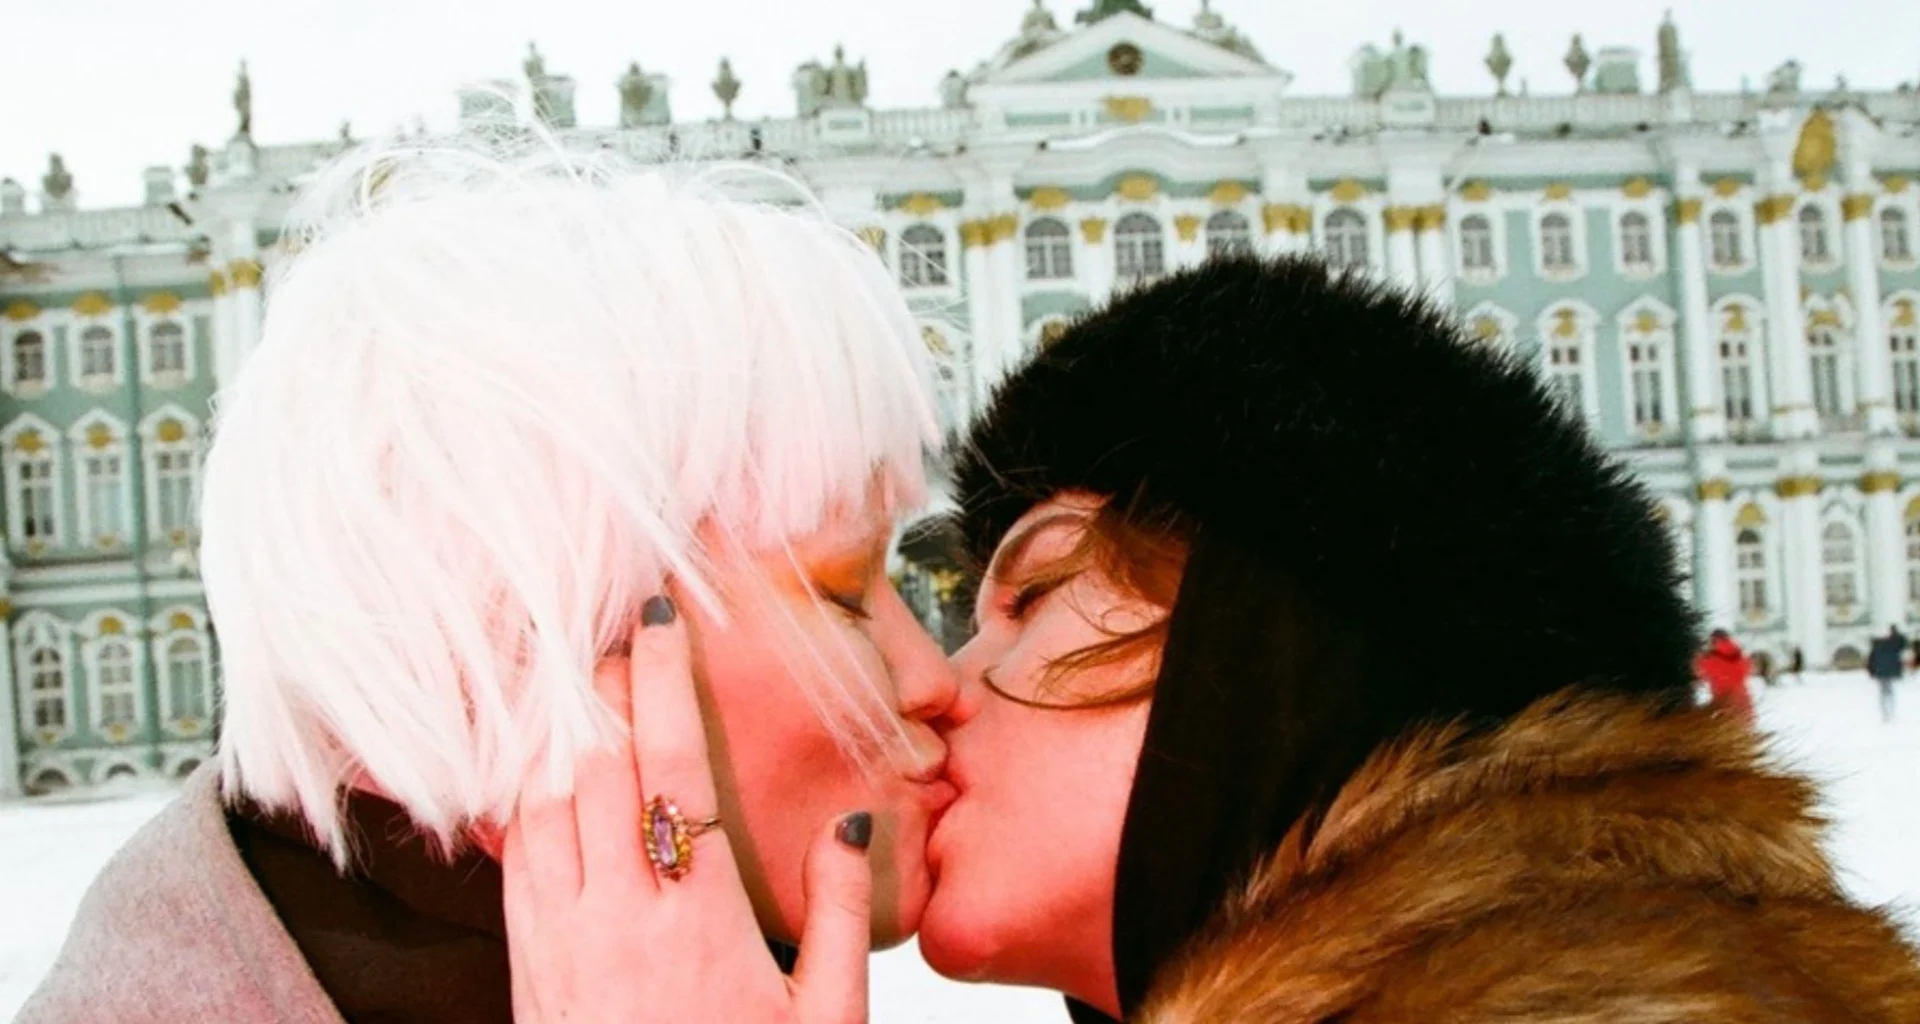 A Russian queer revolution is in the making and you can now follow it on Instagram